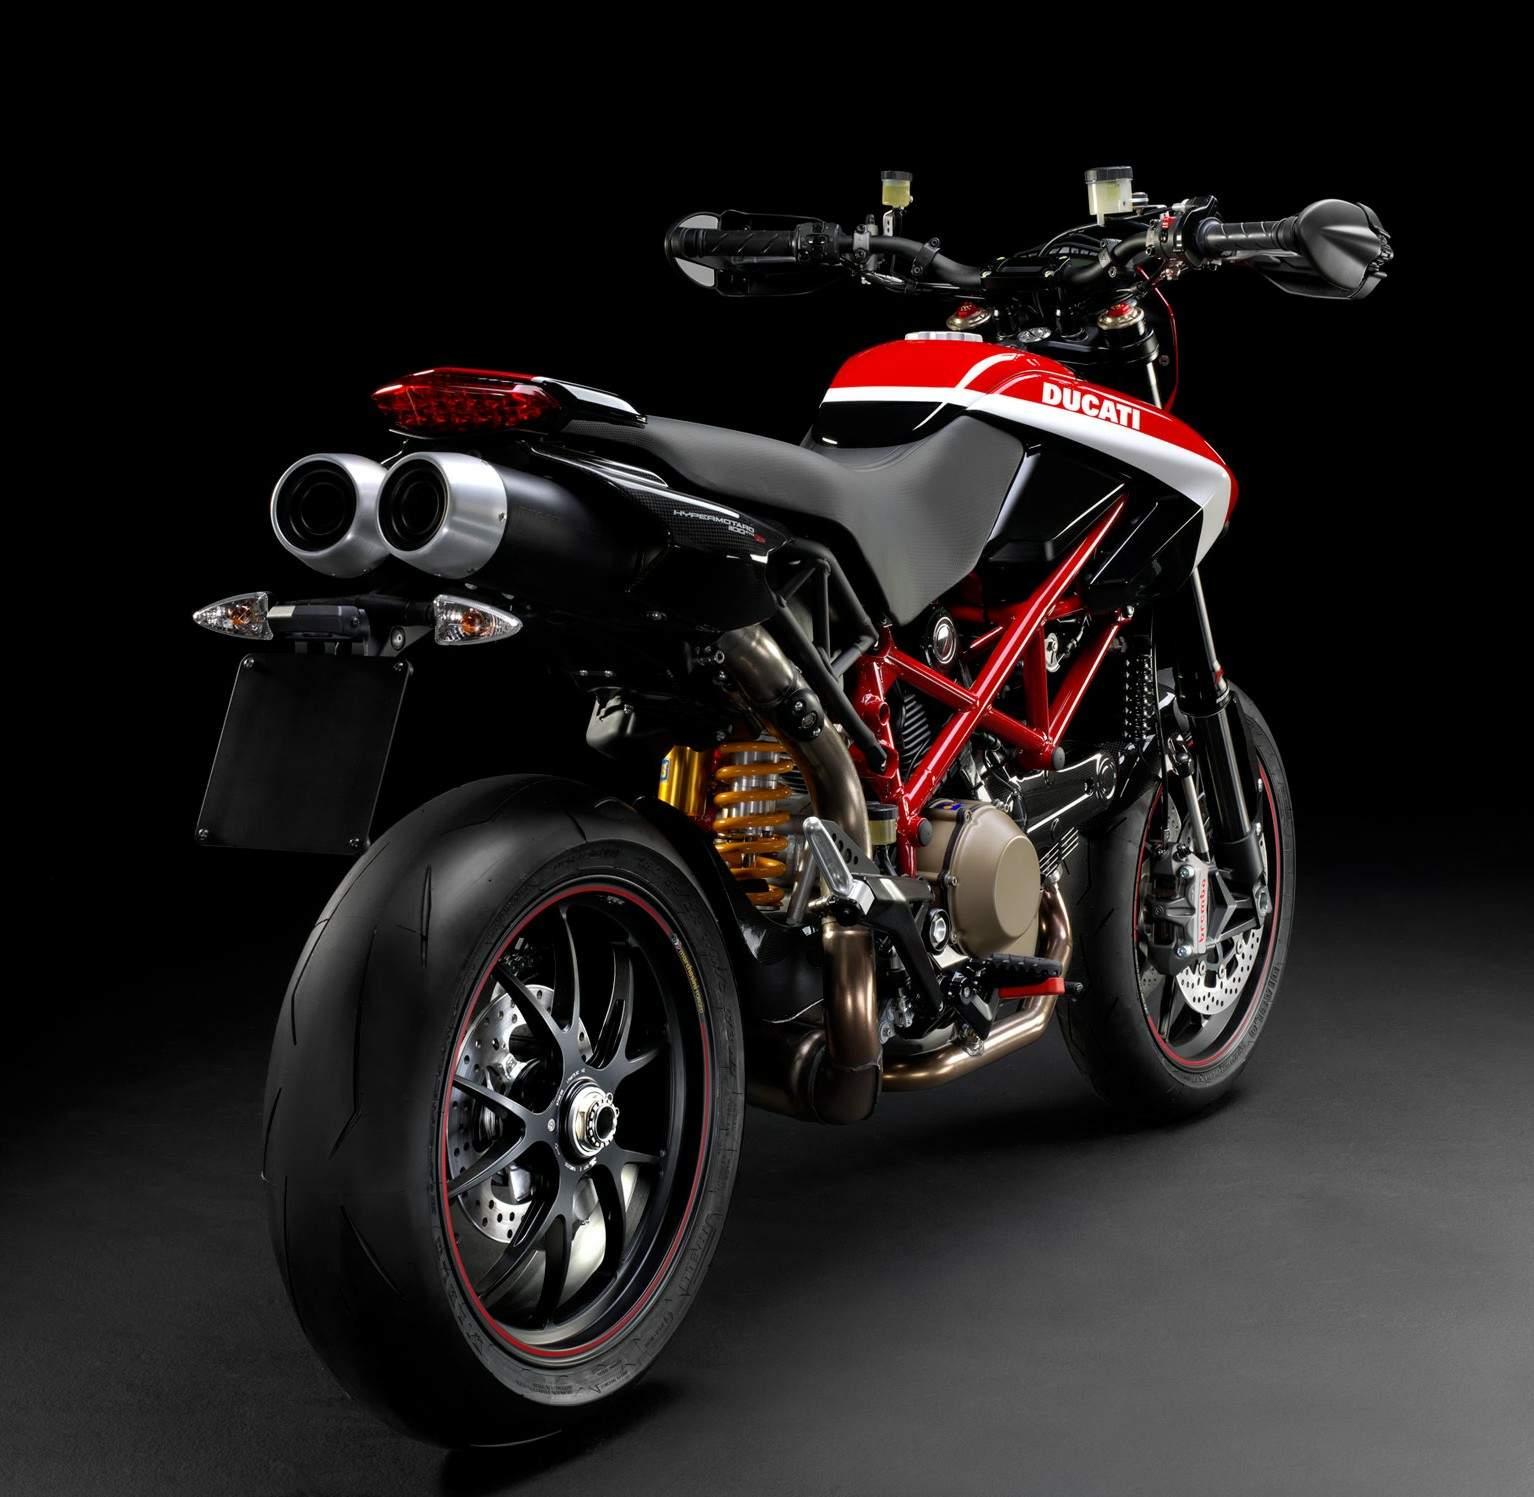 Ducati hypermotard 1100 (2007-2012) review | mcn